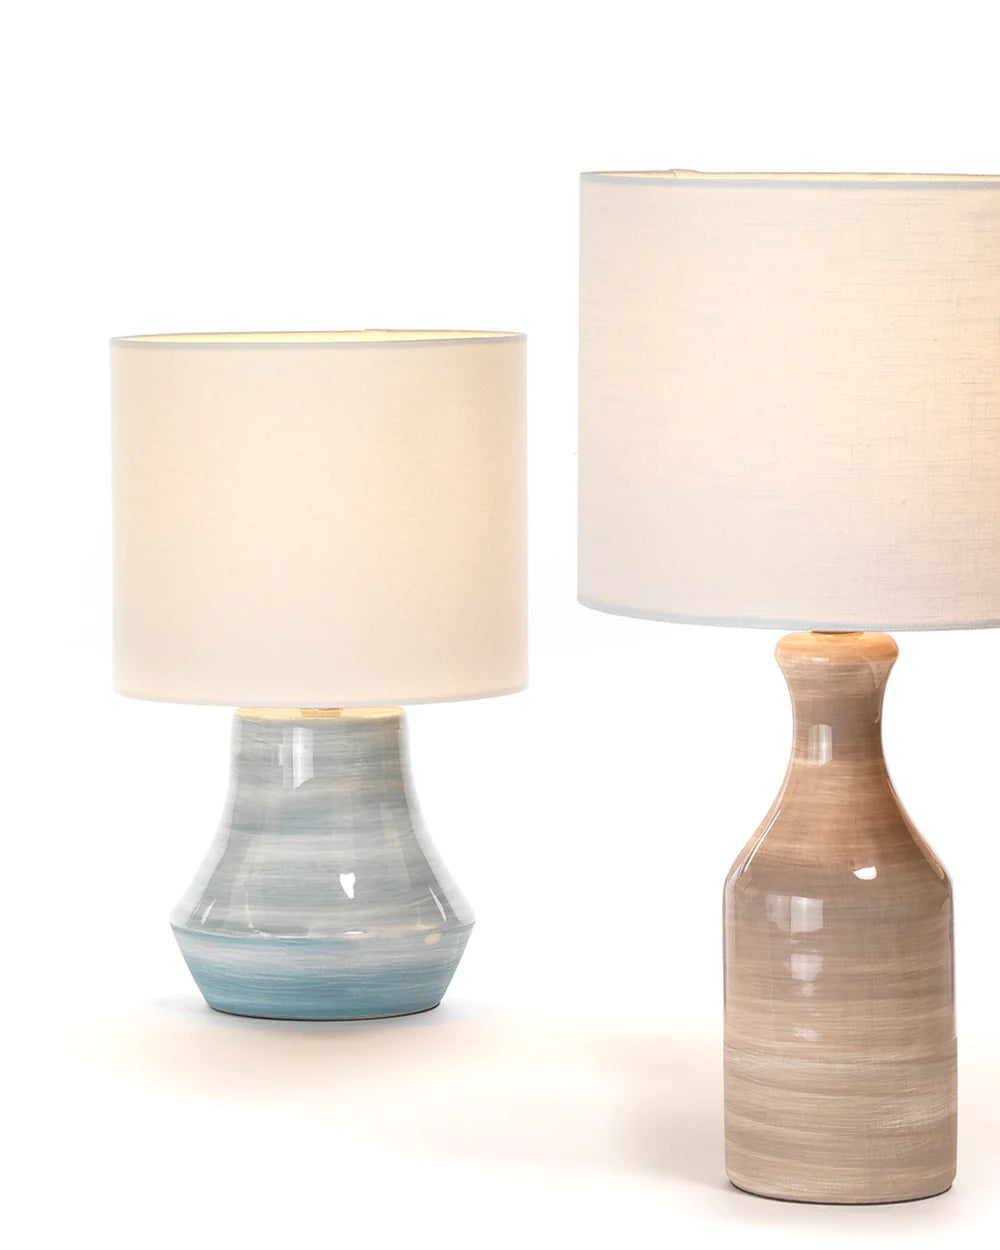 Cottage Table Lamp